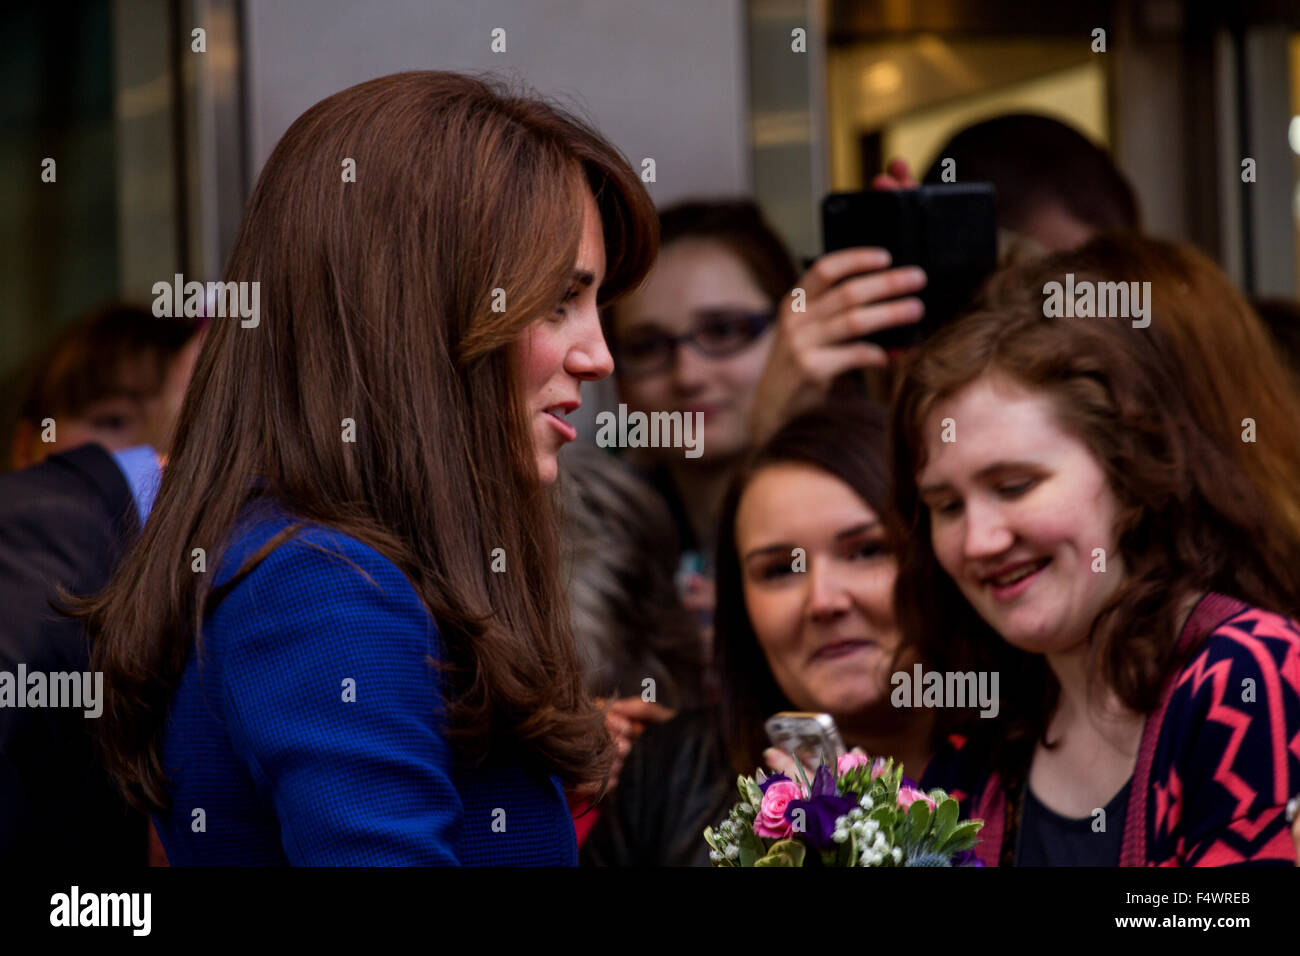 Dundee, Tayside, Scotland, UK, 23rd October 2015. Duke and Duchess of Cambridge visit to Dundee. Prince William and Kate Middleton have made their first official visit to Dundee. The royal couple visiting the Abertay University. They were met by the University Students outside the main entrance in Dundee. © Dundee Photographics / Alamy Live News. Stock Photo